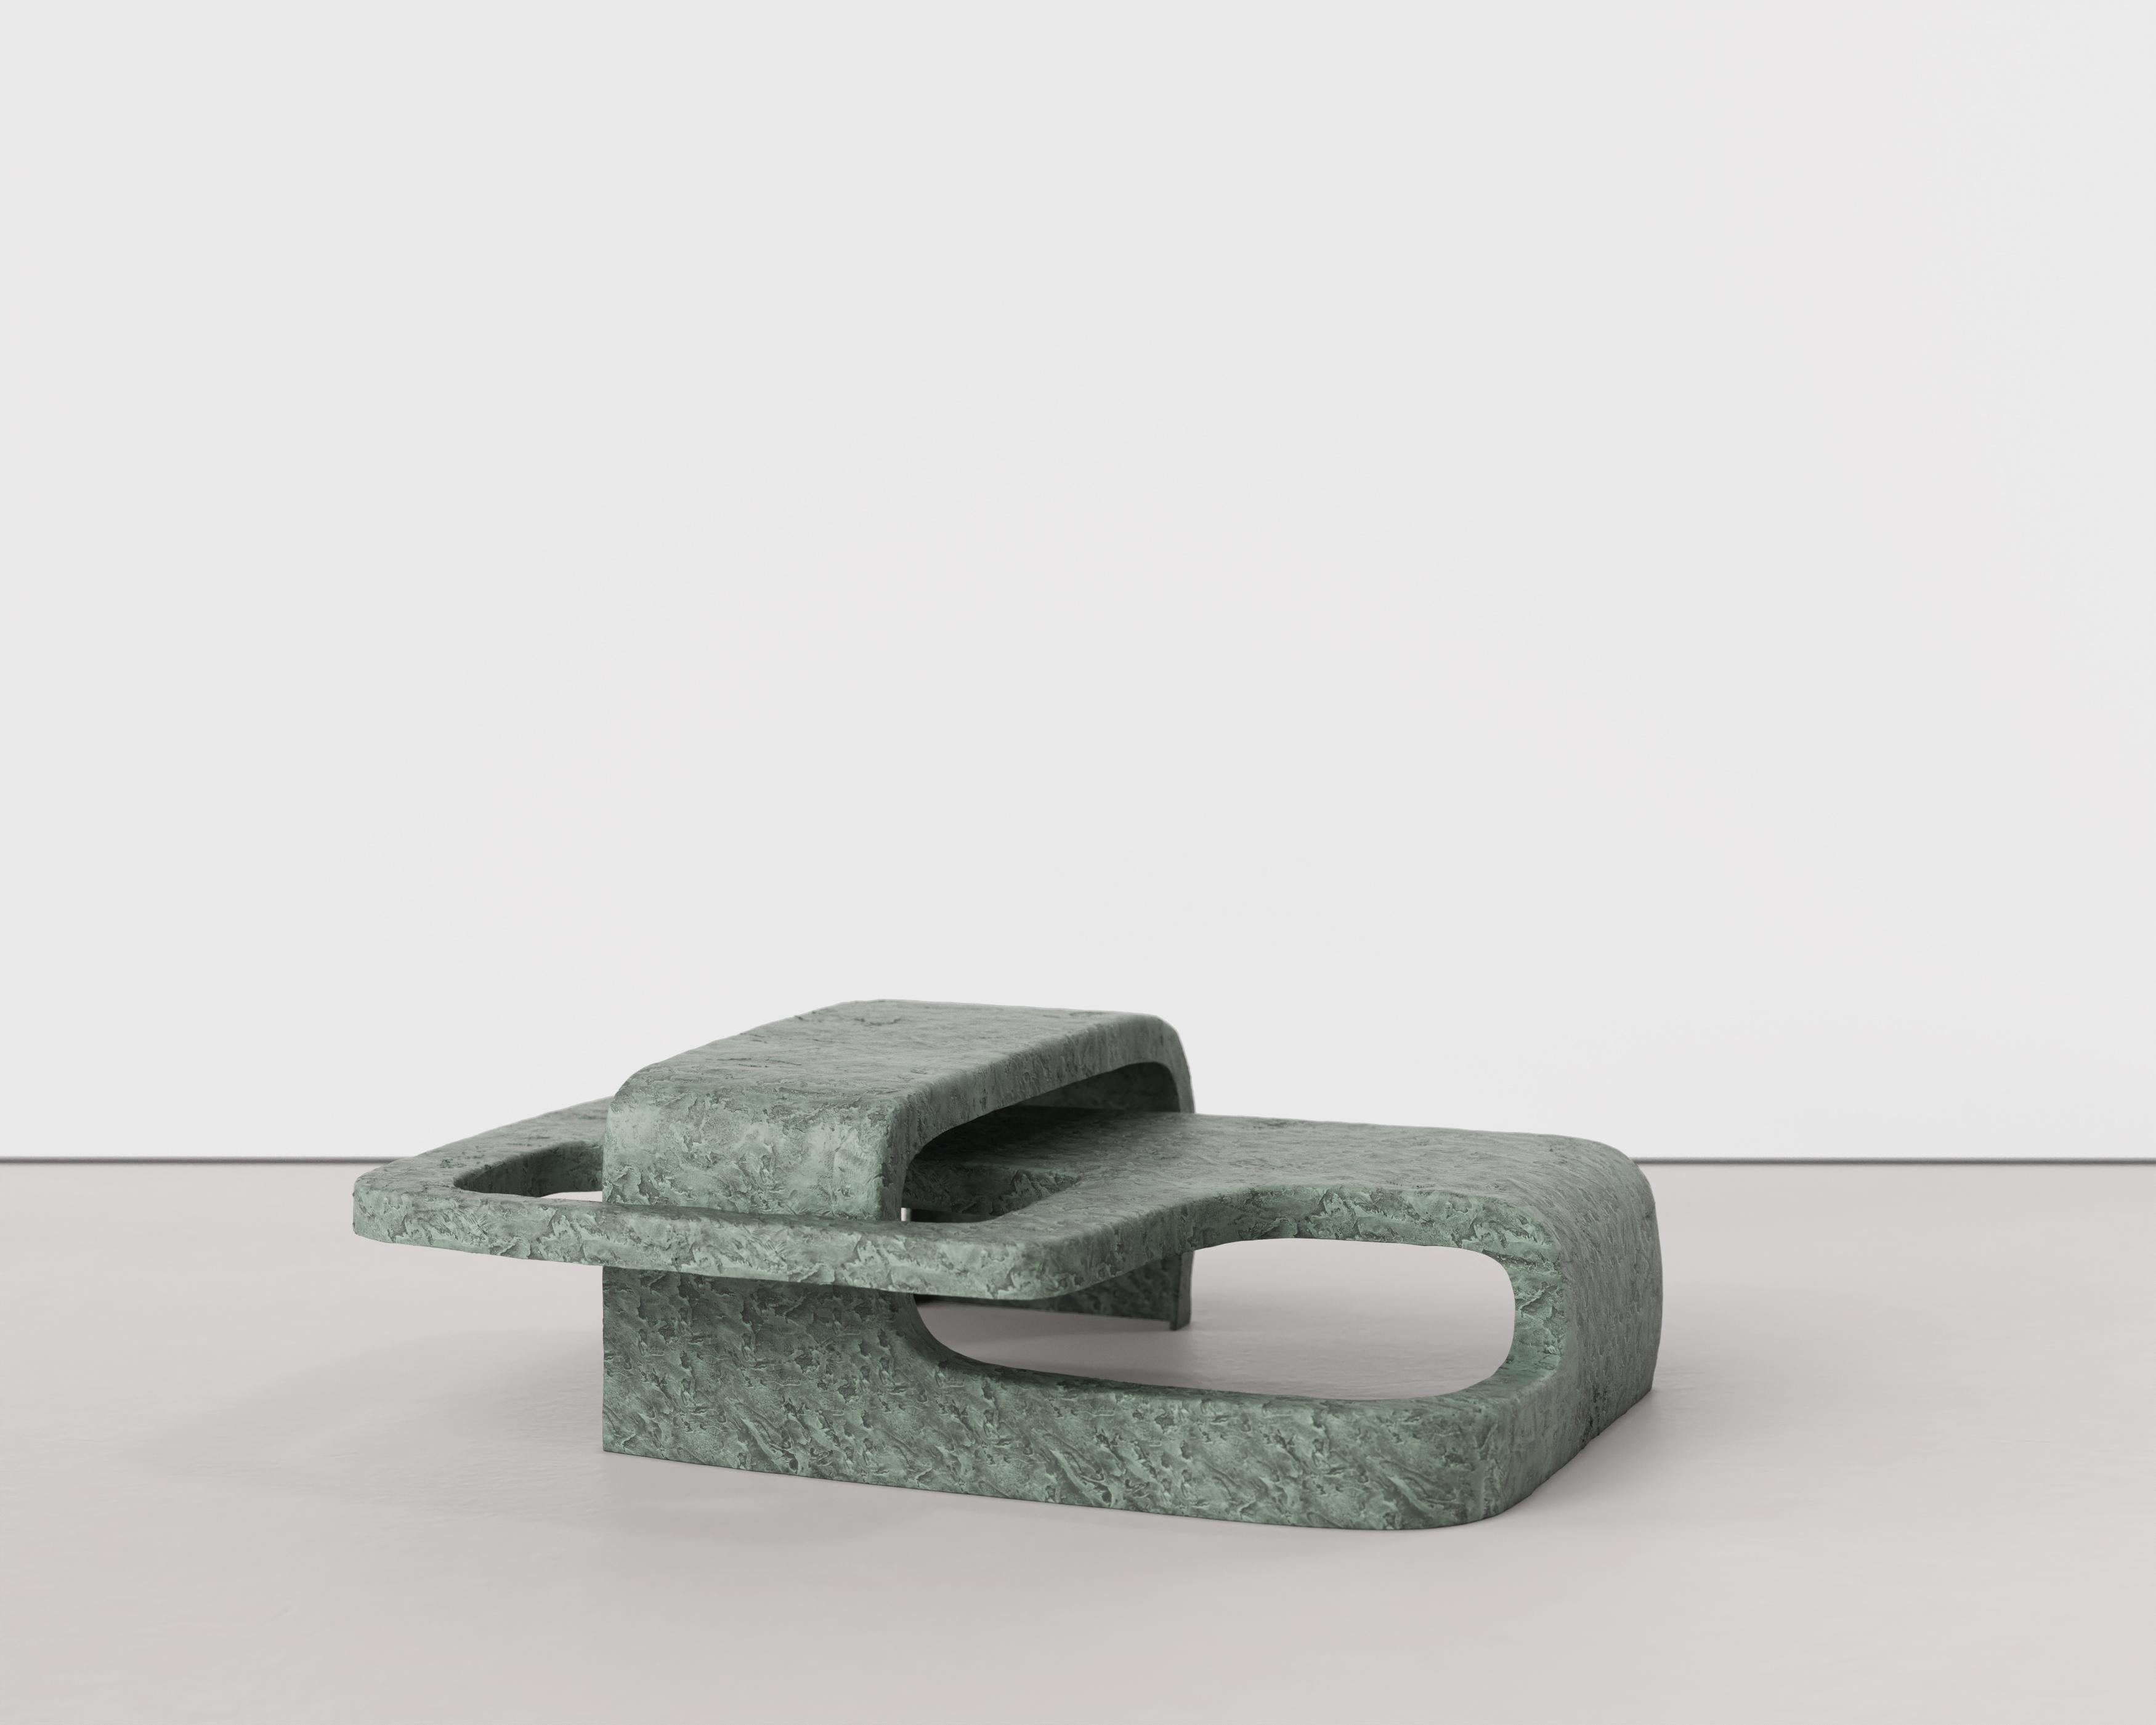 Vertigo N01 low table by Edizione Limitata
Exclusive for Galerie Philia.
Limited Edition. Signed and numbered.
Designers: Simone Fanciullacci
Dimensions: H 29 × W 72 × L 92 cm
Materials: Green patina bronze

Edizione Limitata, that is to say